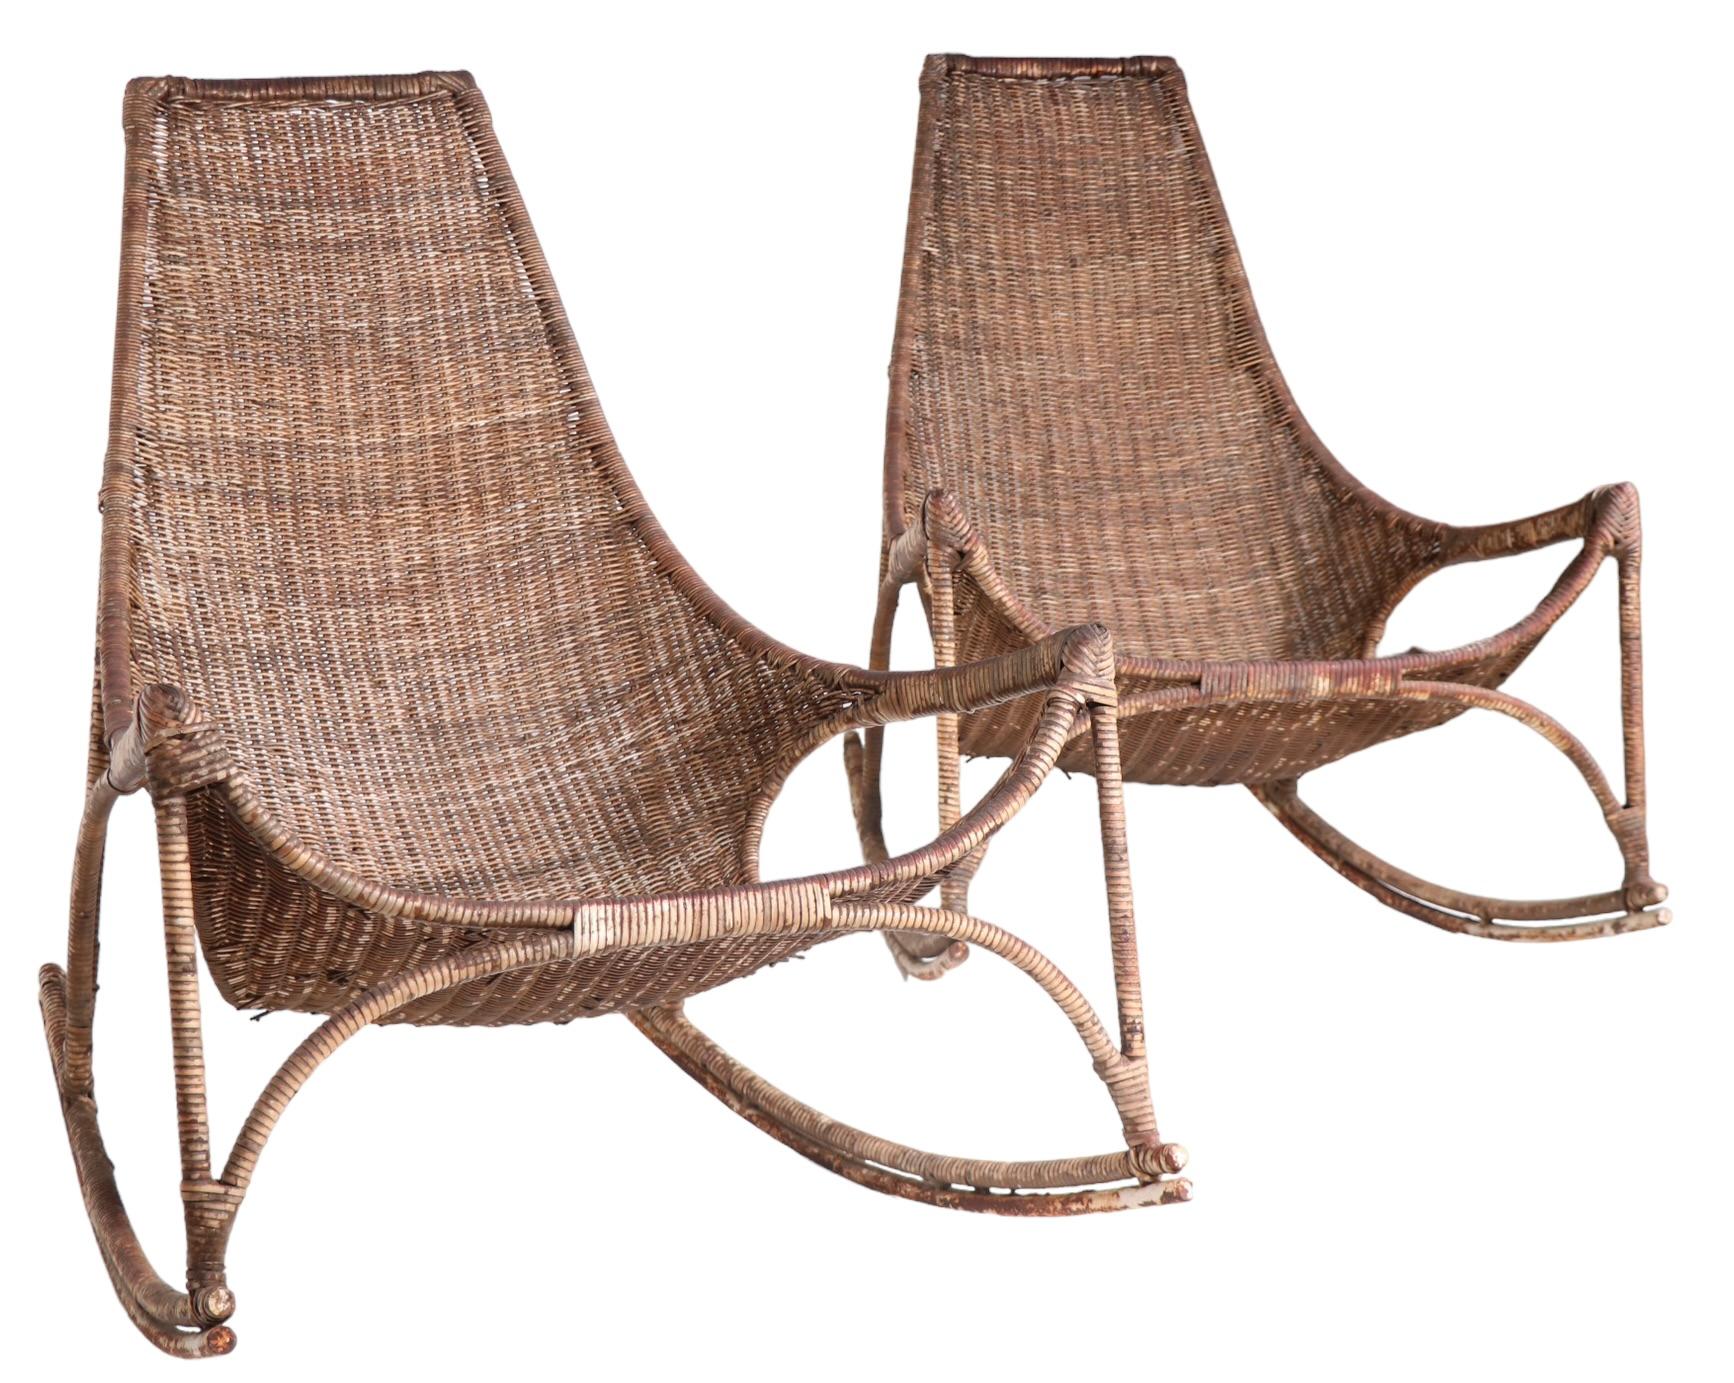 Pr. Wicker Rocking Chairs by Francis Mair c 1950/1960's For Sale 3